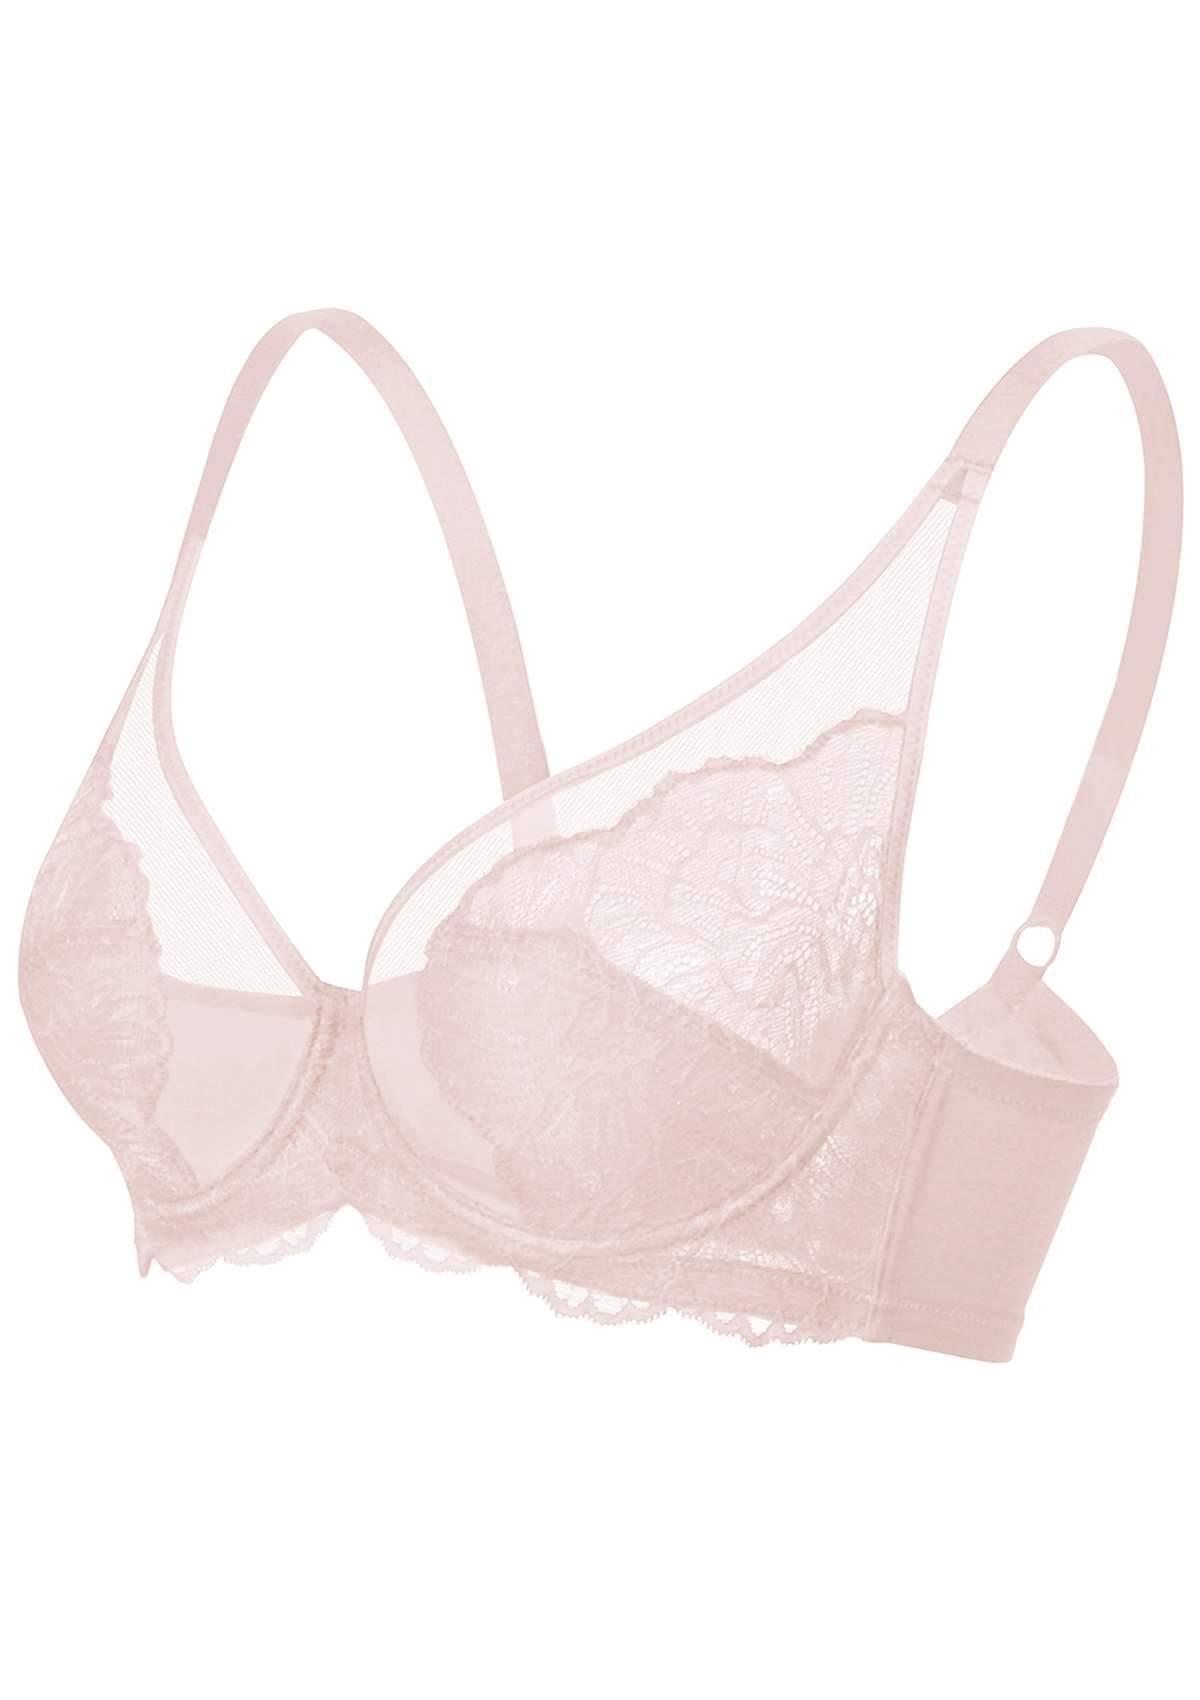 HSIA Blossom Lace Bra And Panties Set: Best Bra For Large Busts - Dark Pink / 40 / I